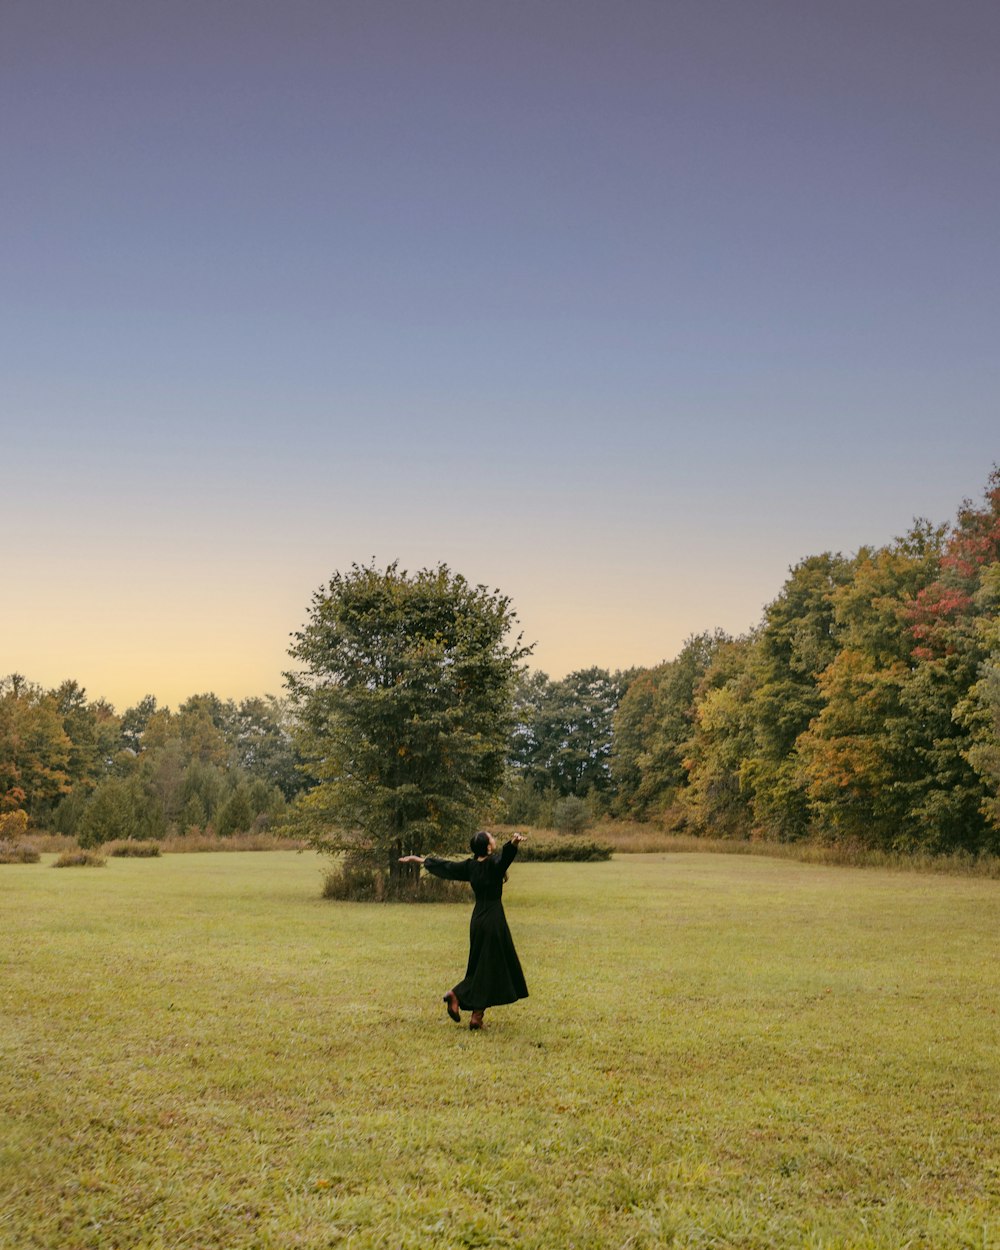 a person in a black dress and a black skirt in a field with trees and blue sky